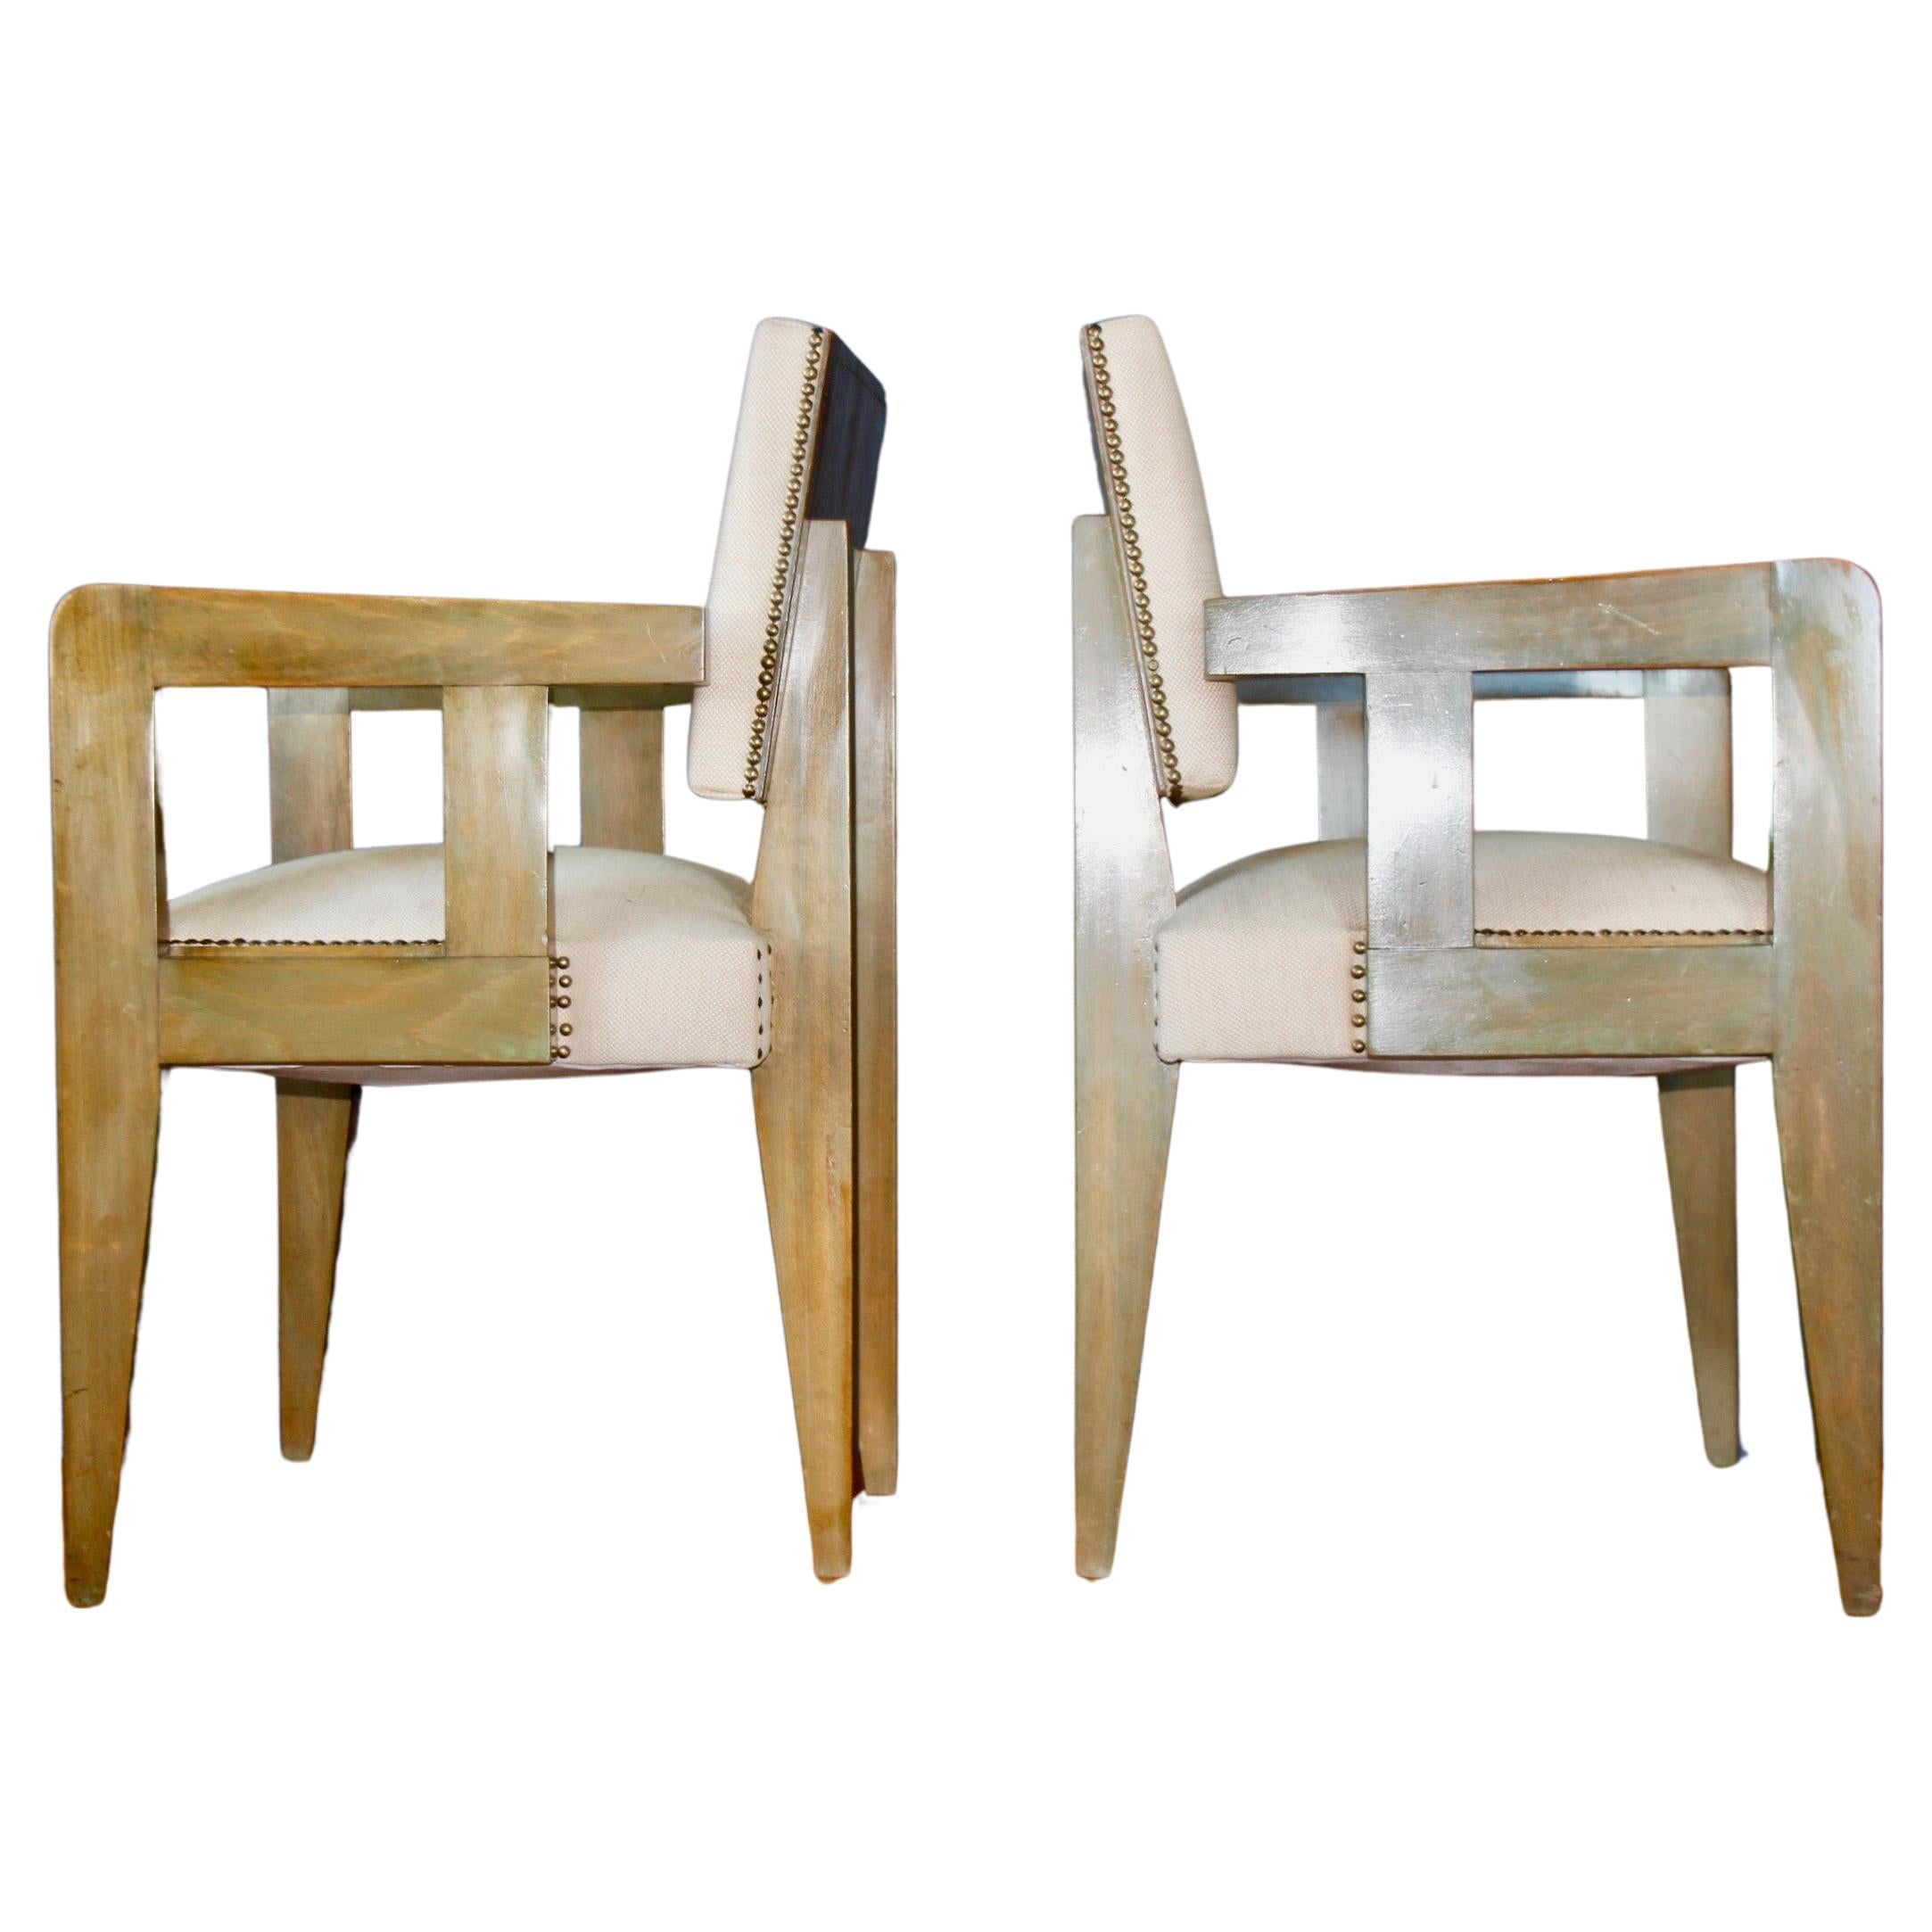 Pair of Andre Sornay bridge chairs, stained Oregon pine, ebonised wood